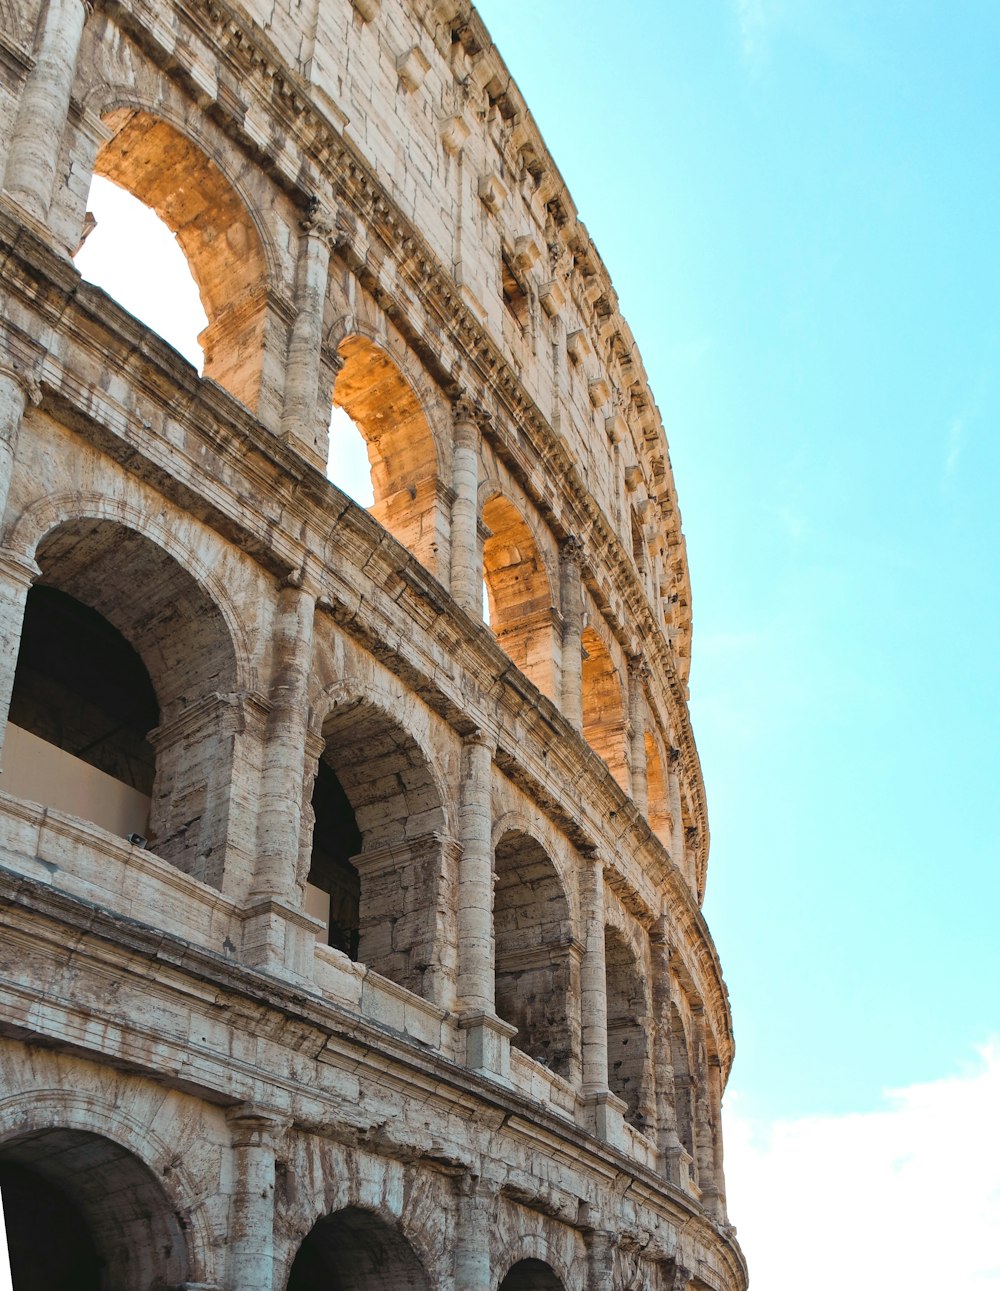 low-angle photography of The Colosseum during daytime